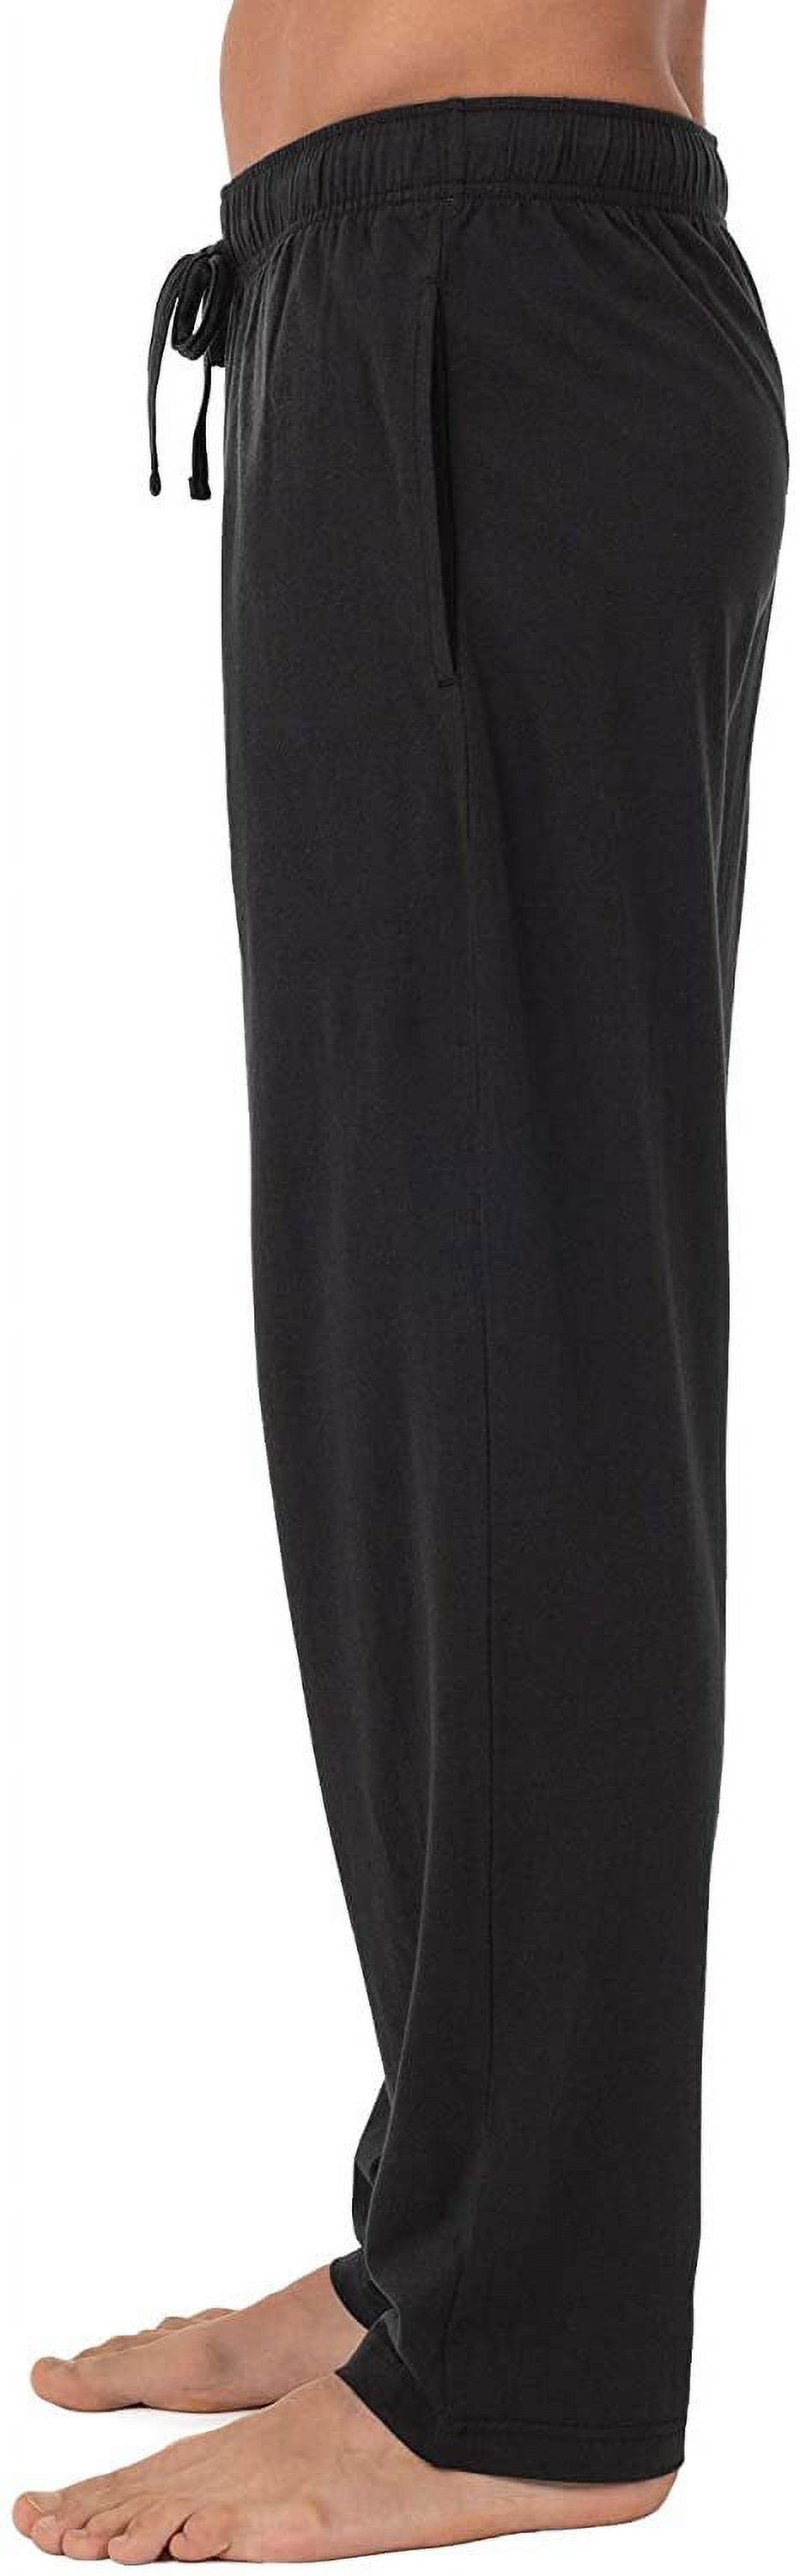 Fruit of the Loom Men's and Big Men's Jersey Knit Pajama Pants, Sizes S-6XL - image 3 of 7